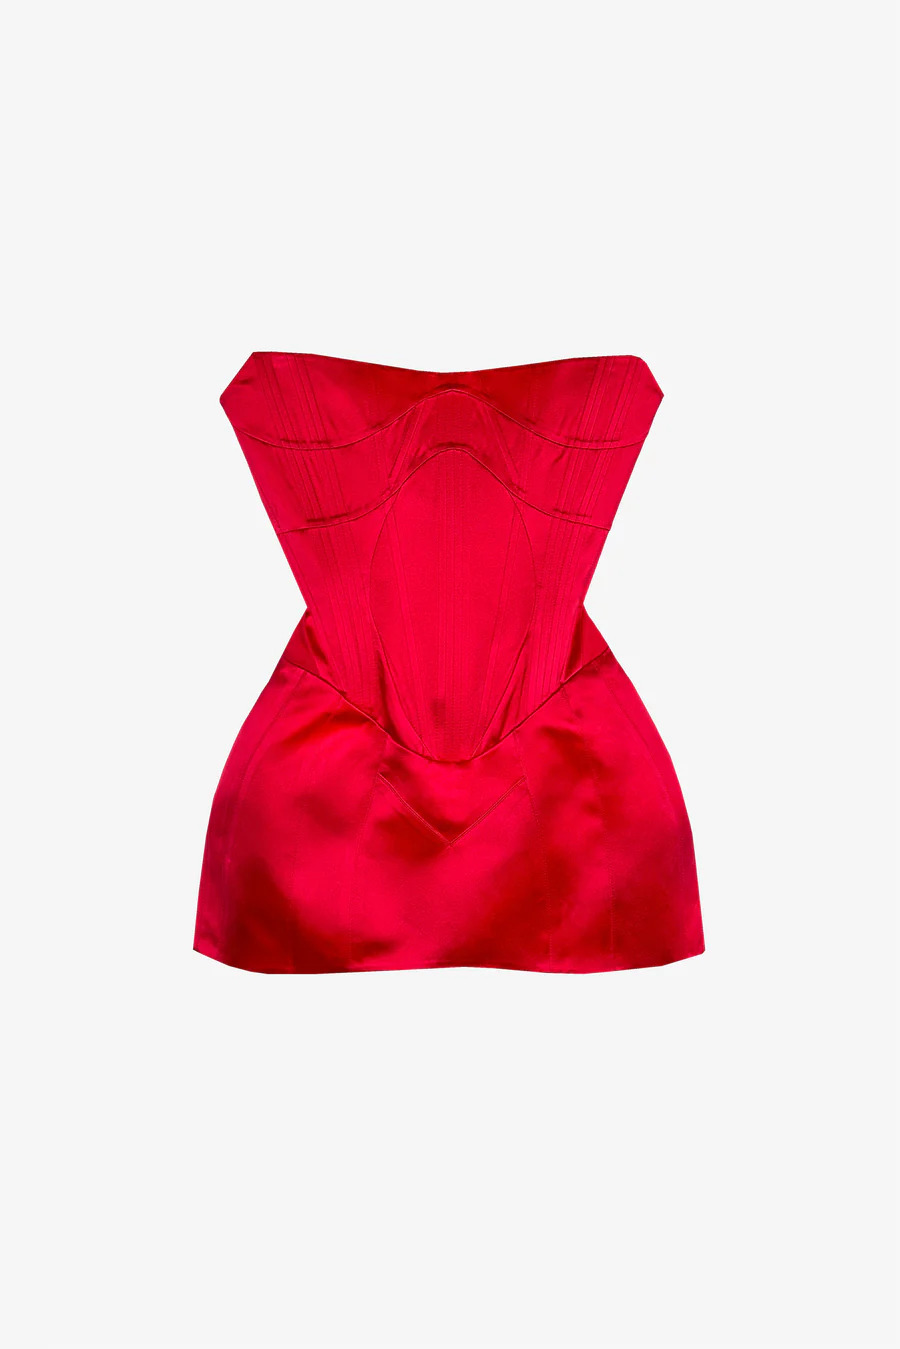 You Can Buy Red Mini Margot Robbie Wore To Barbie Premiere